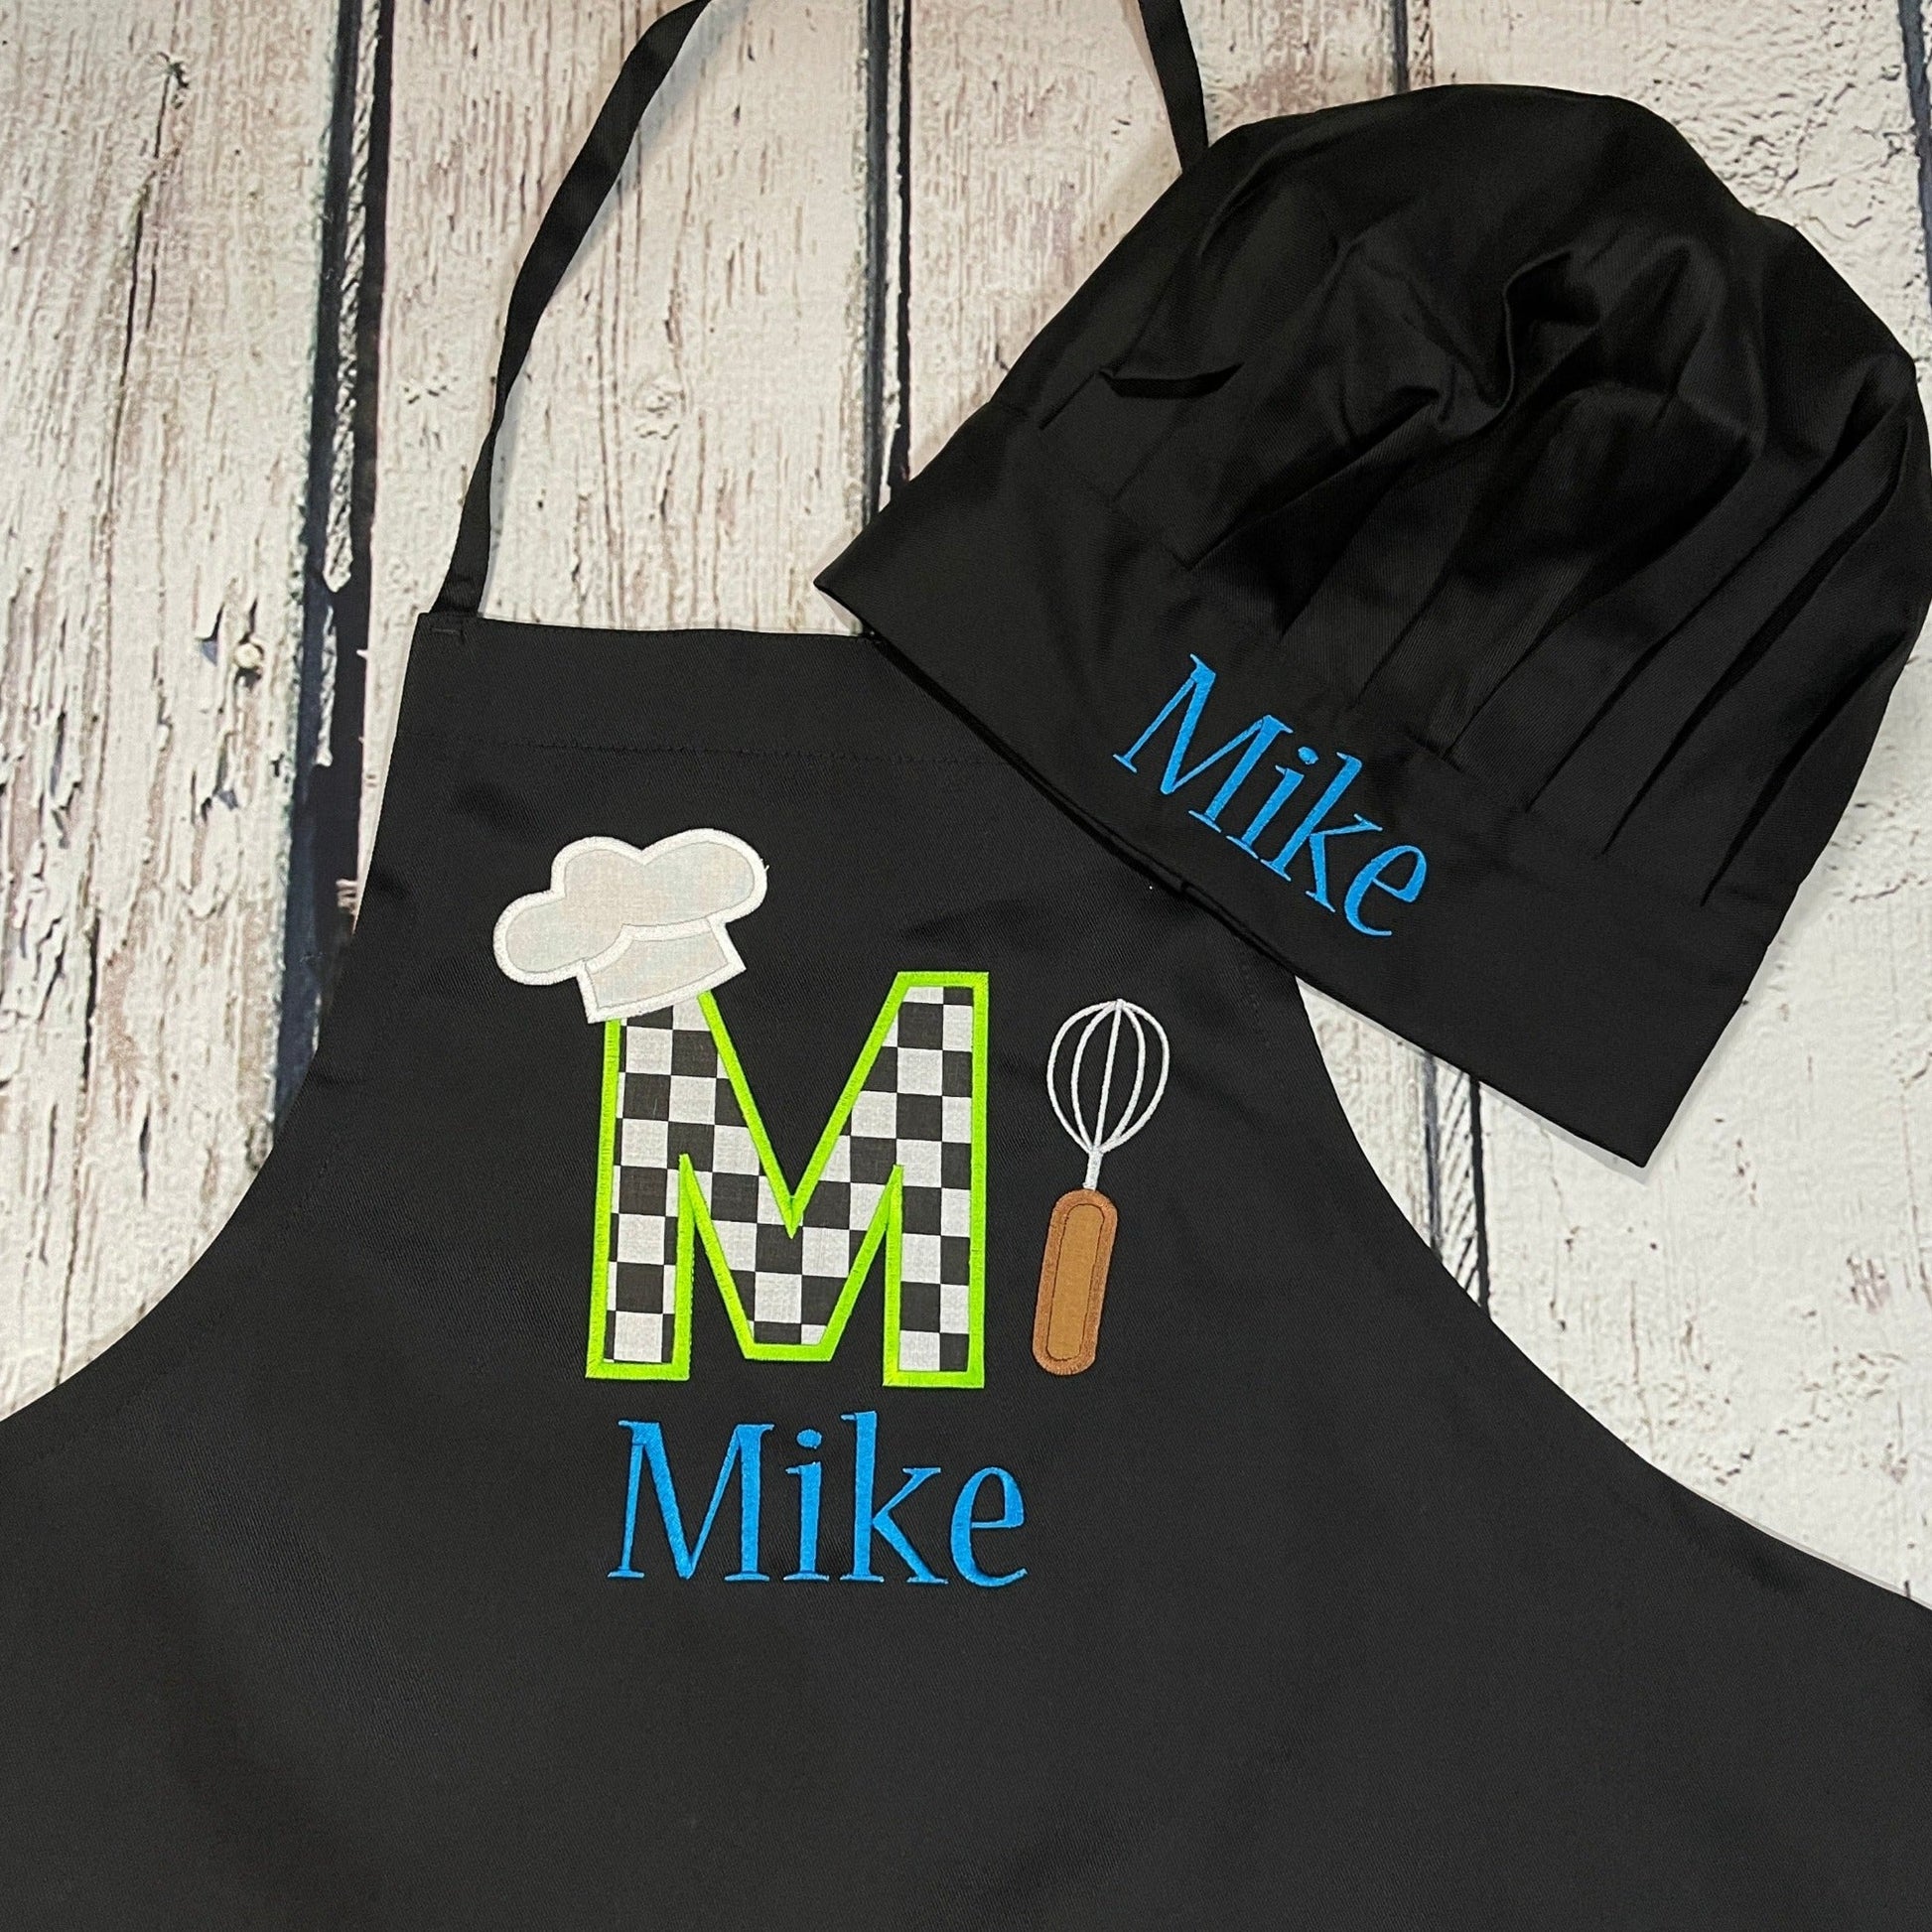 Black personalized embroidered apron with chef hat large M name Mike